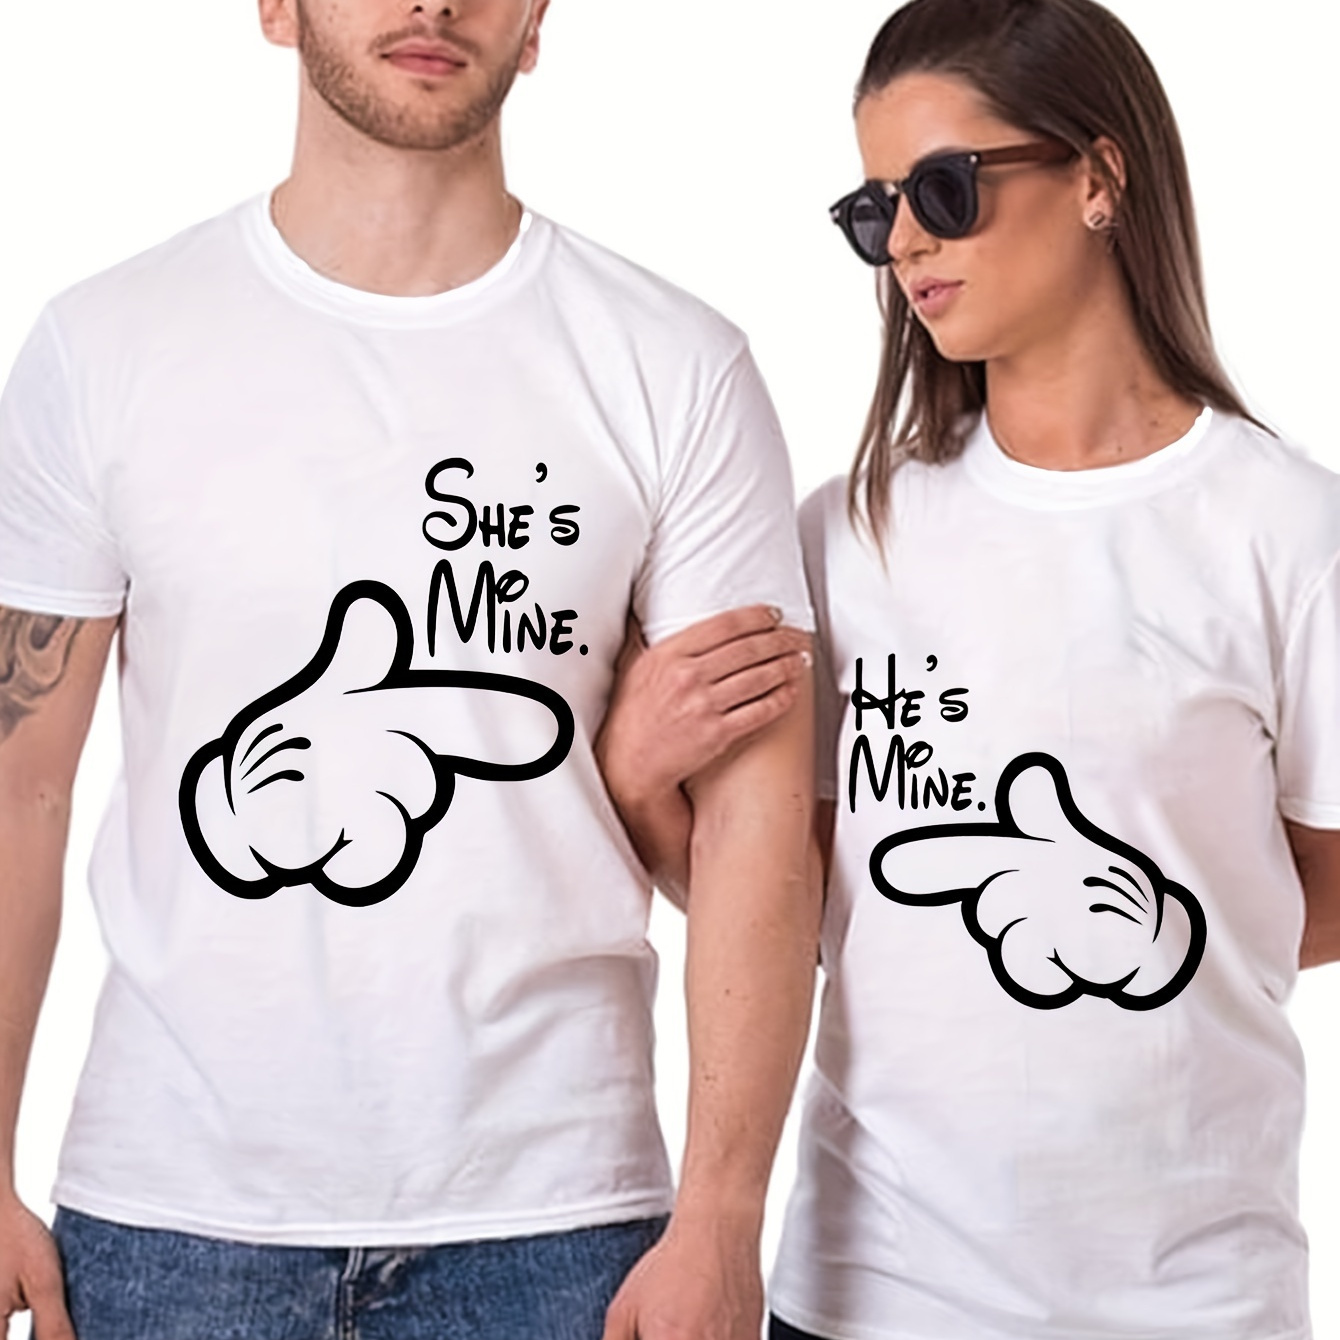 

Couple Front Print T-shirt "he's/she's Mine" Graphic Tee Summer Casual Tee Streetwear Top For Men Women